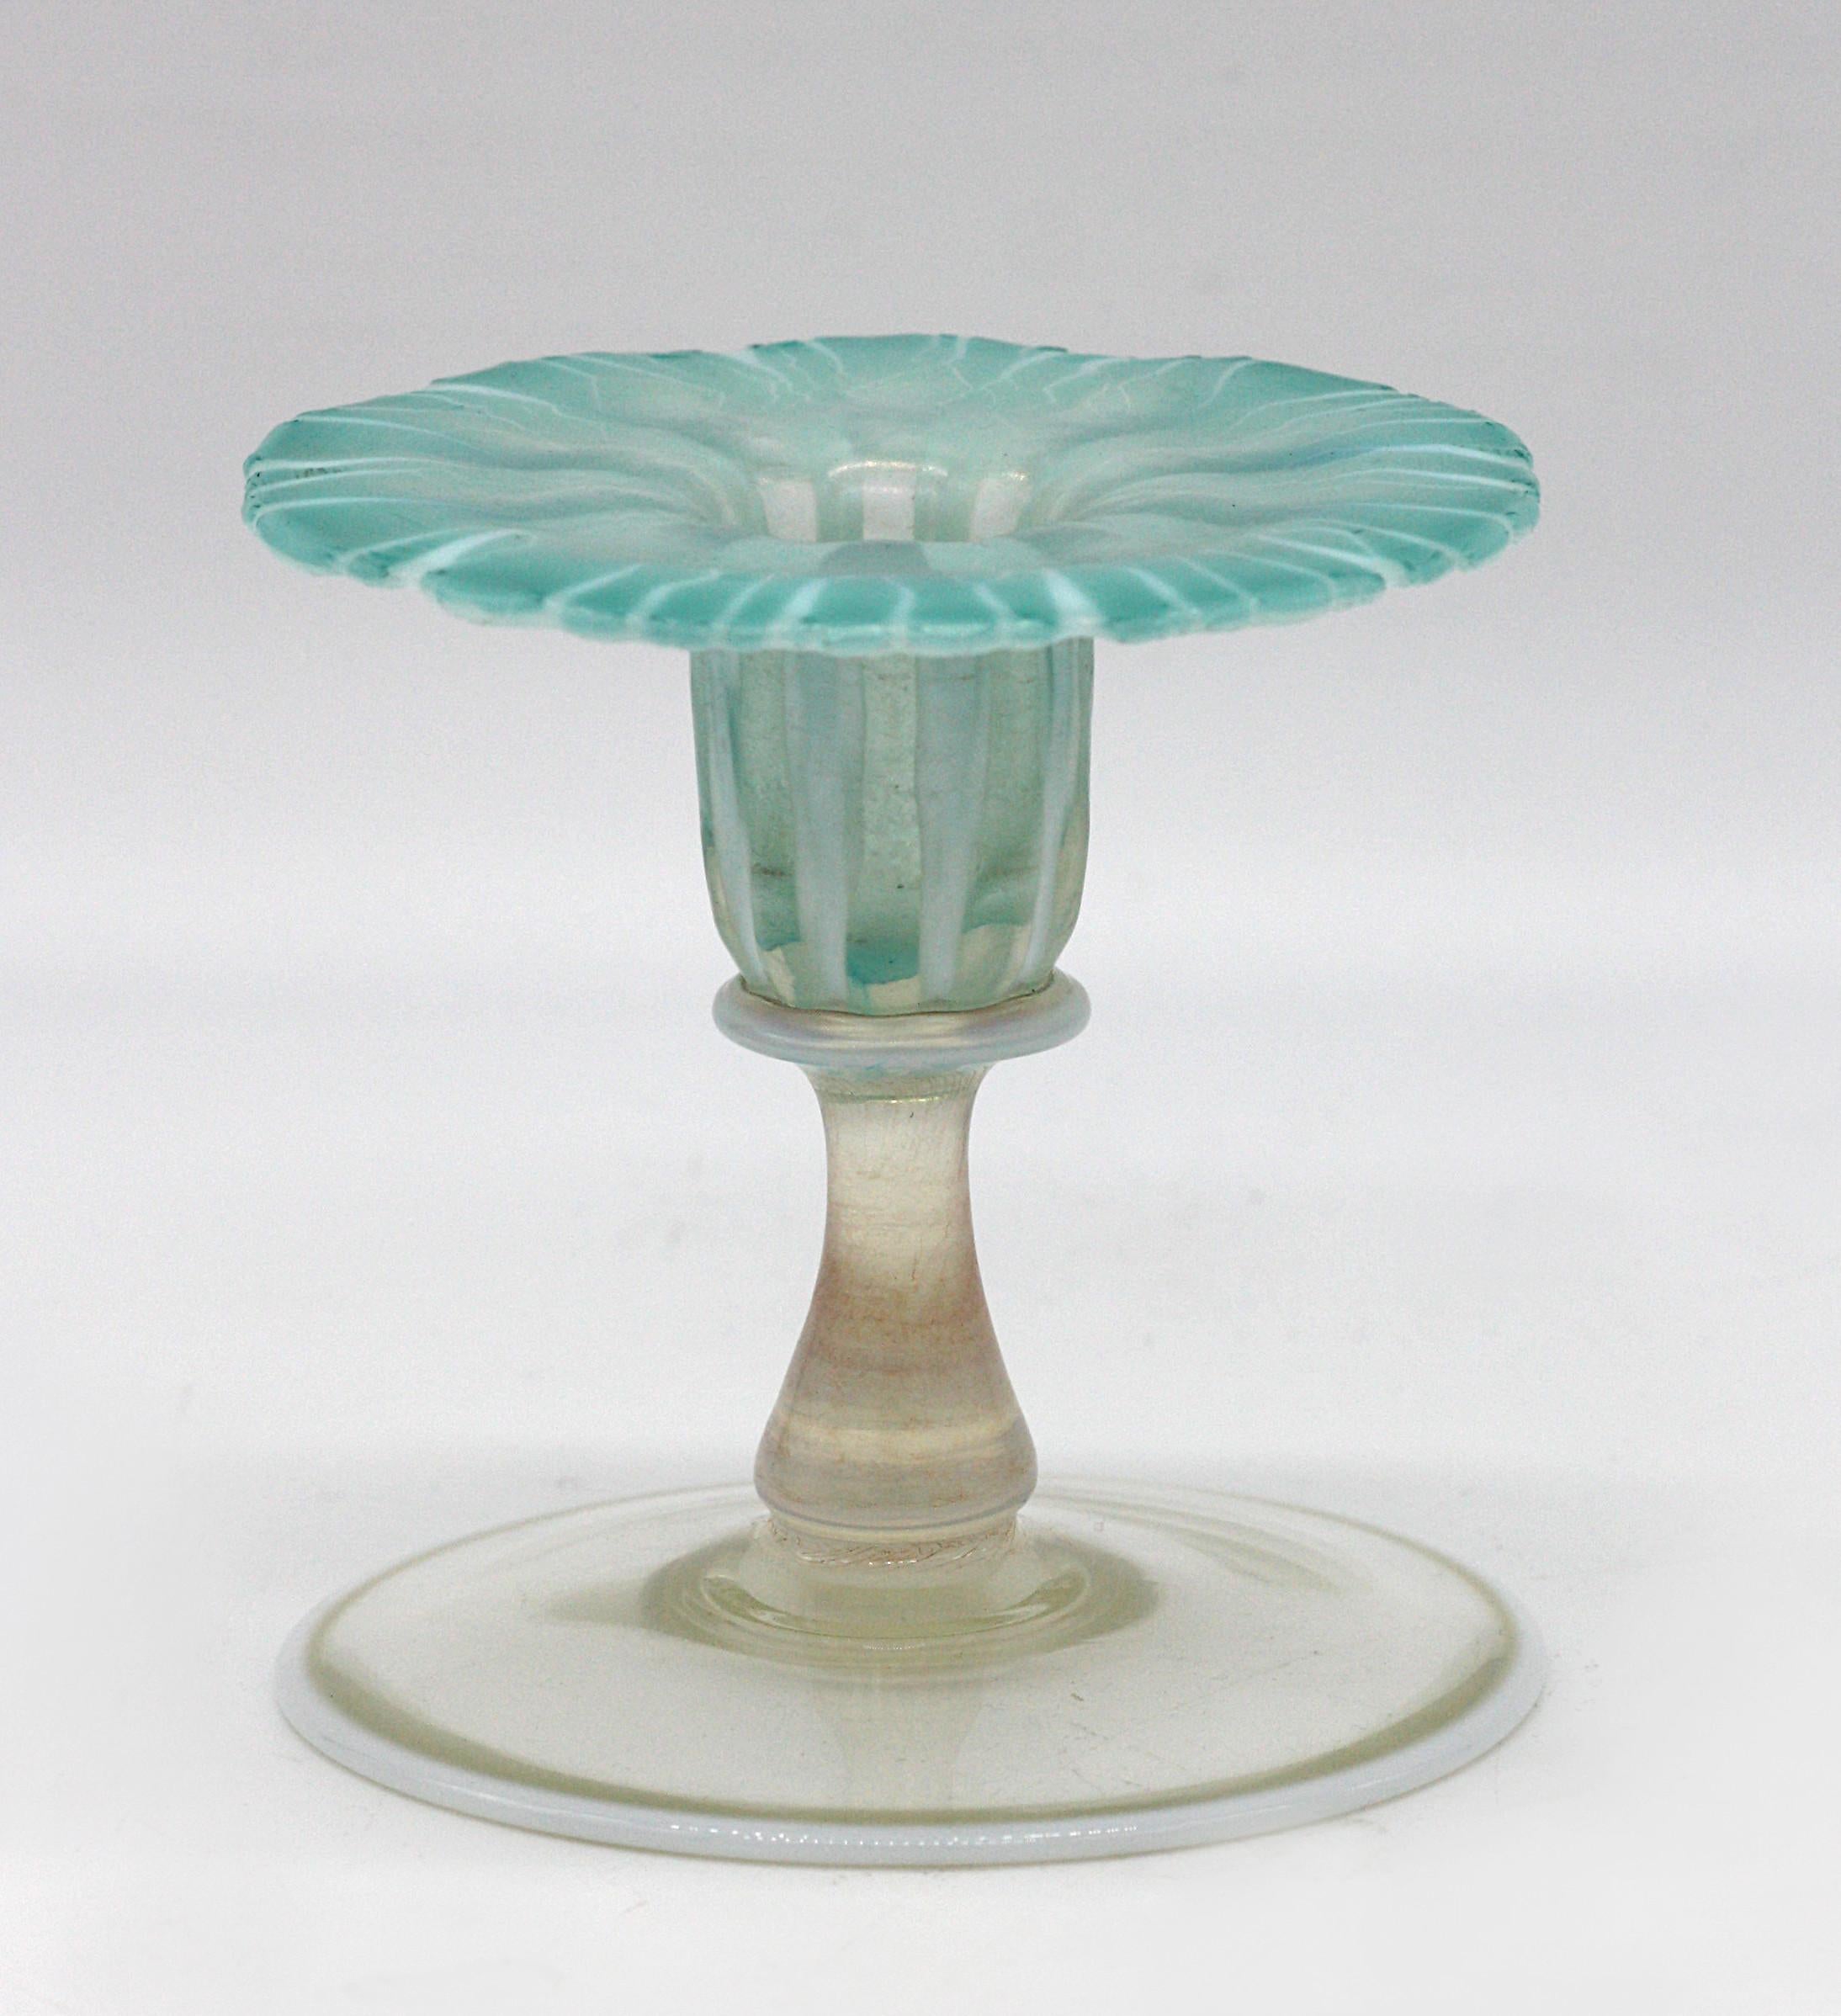 Tiffany Favrile Glass Morning Glory Candlestick circa 1918-1928 For Sale 1